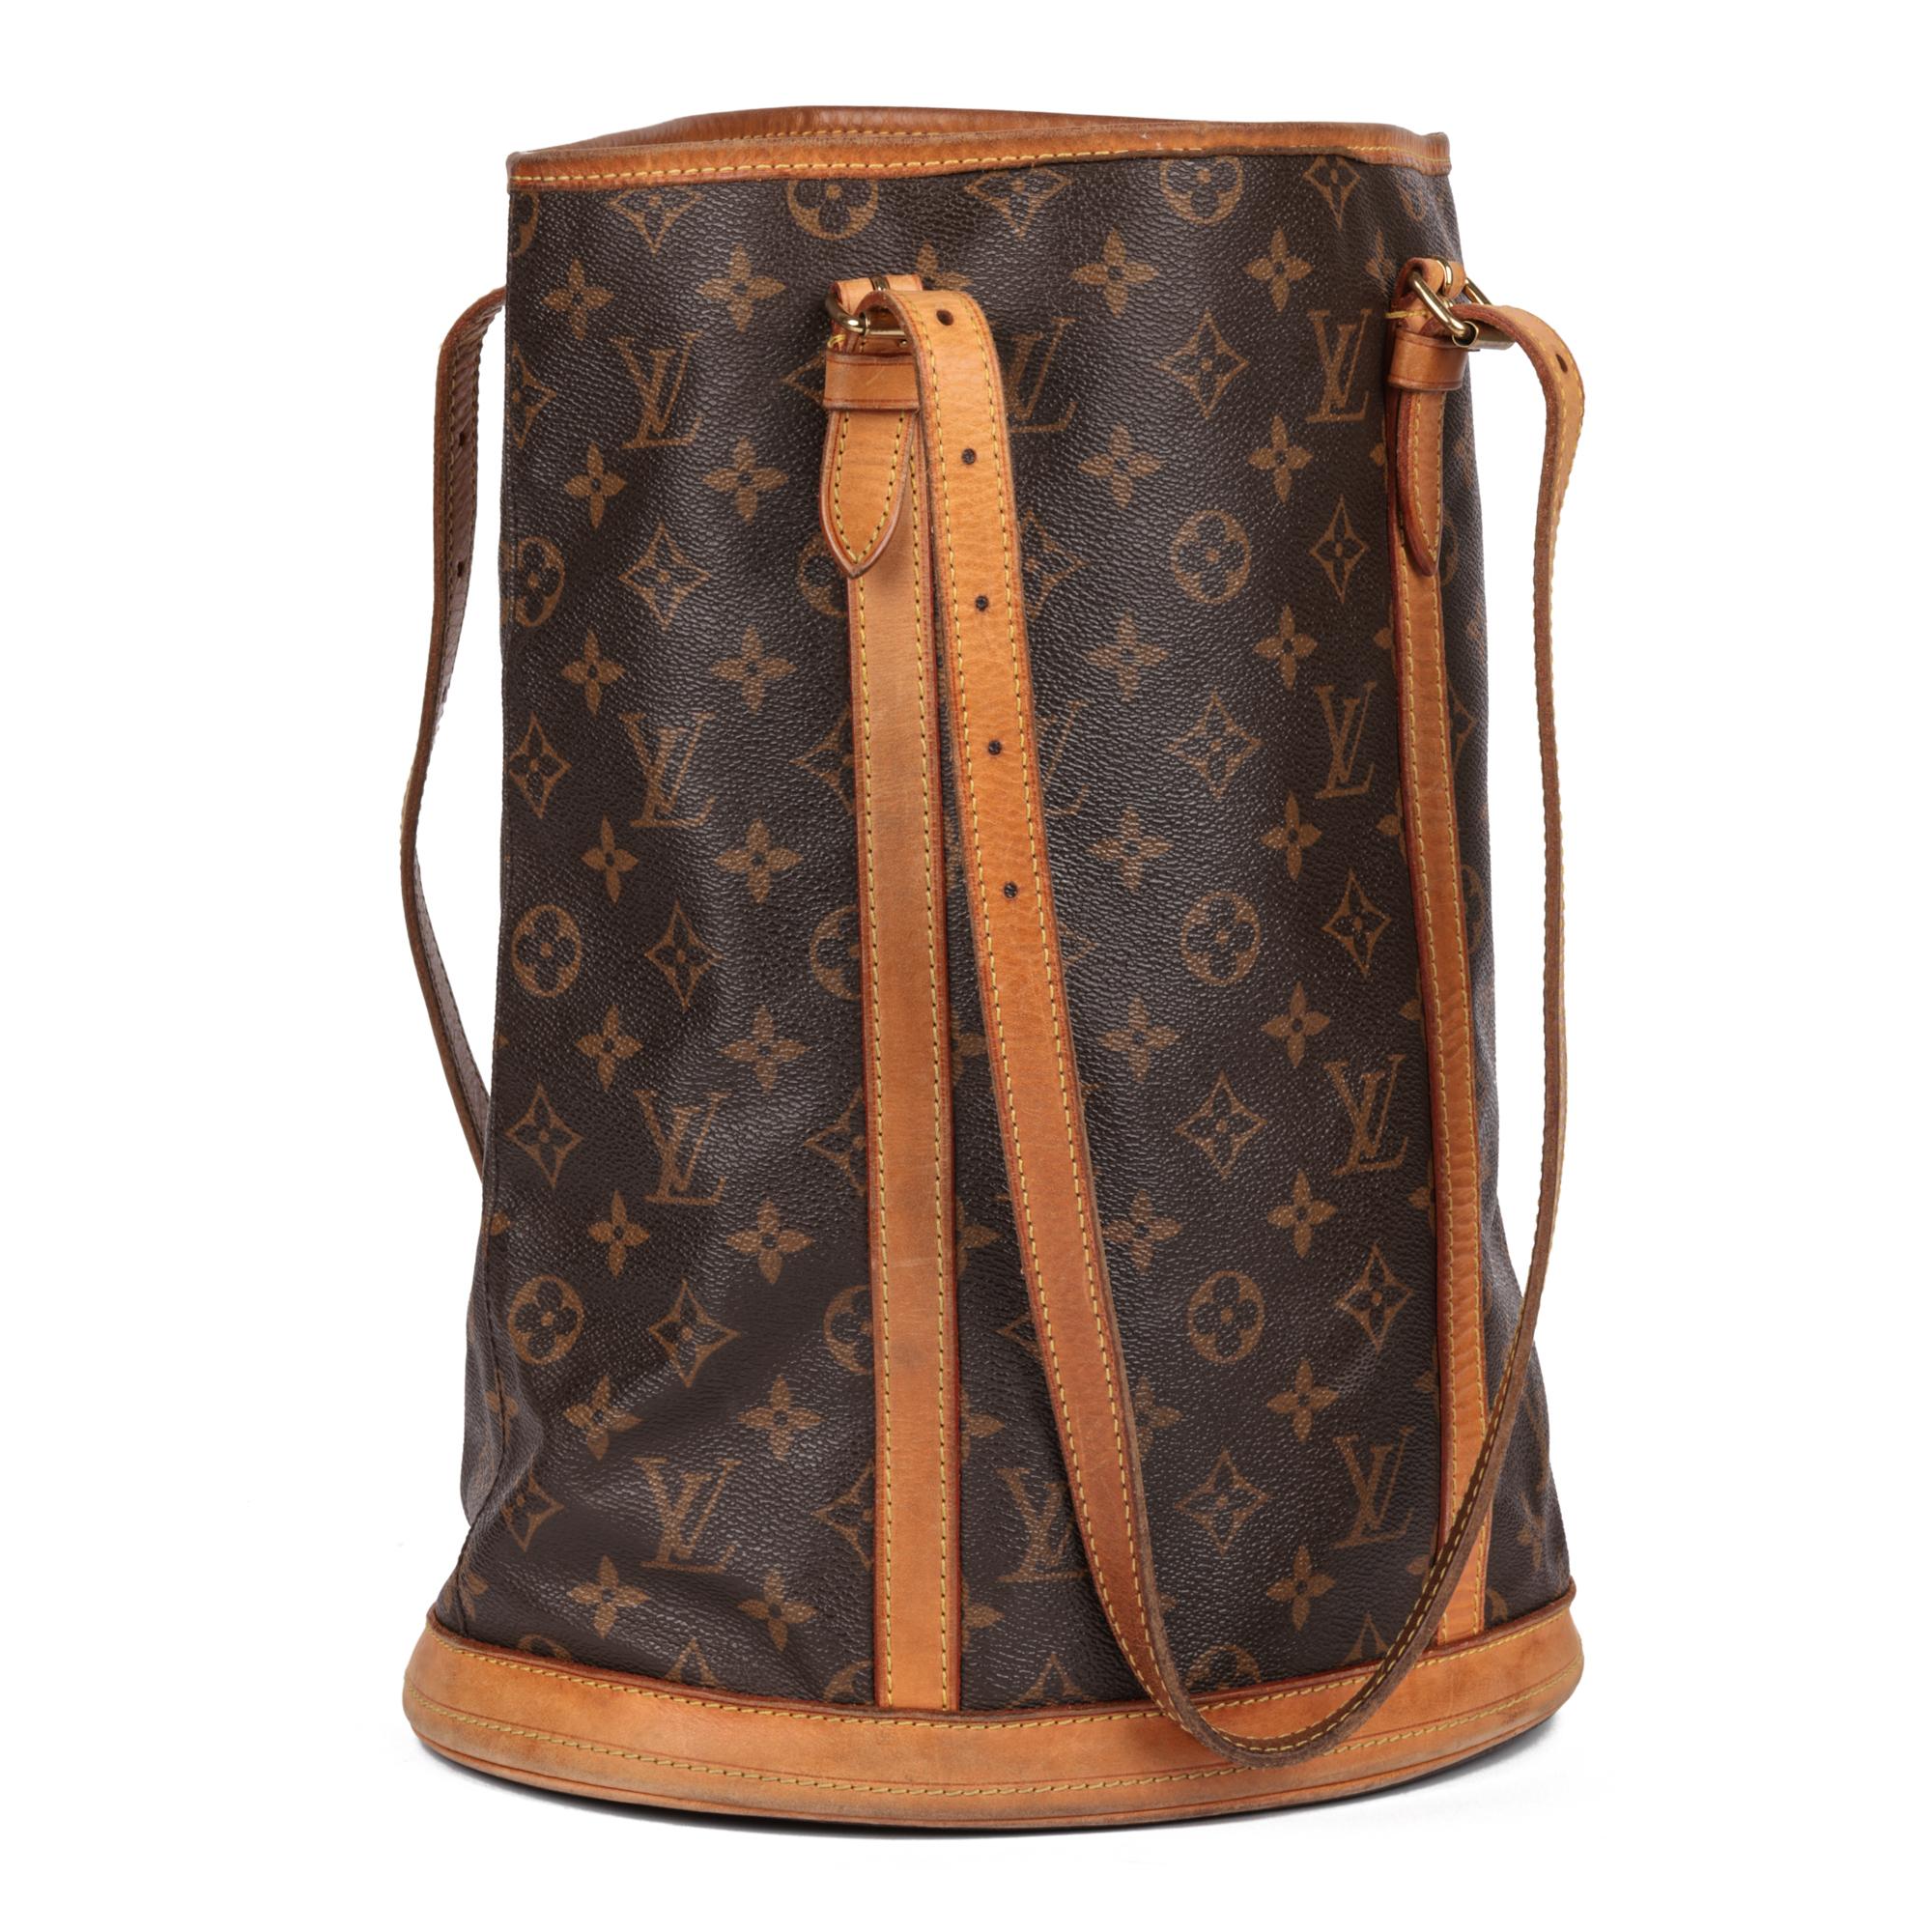 LOUIS VUITTON
Brown Monogram Coated Canvas & Vachetta Leather Bucket Bag

Serial Number: FL0086
Age (Circa): 2006
Authenticity Details: Date Stamp (Made in France)
Gender: Ladies
Type: Tote, Shoulder

Colour: Brown
Hardware: Golden